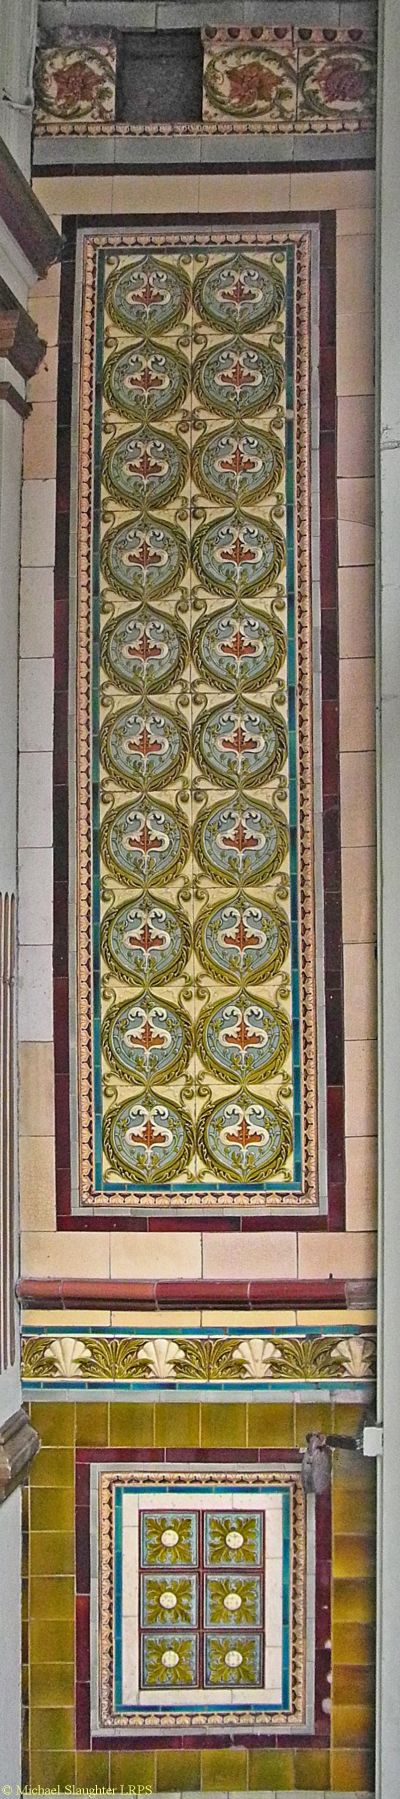 Tiling in Entrance.  by Michael Slaughter. Published on 